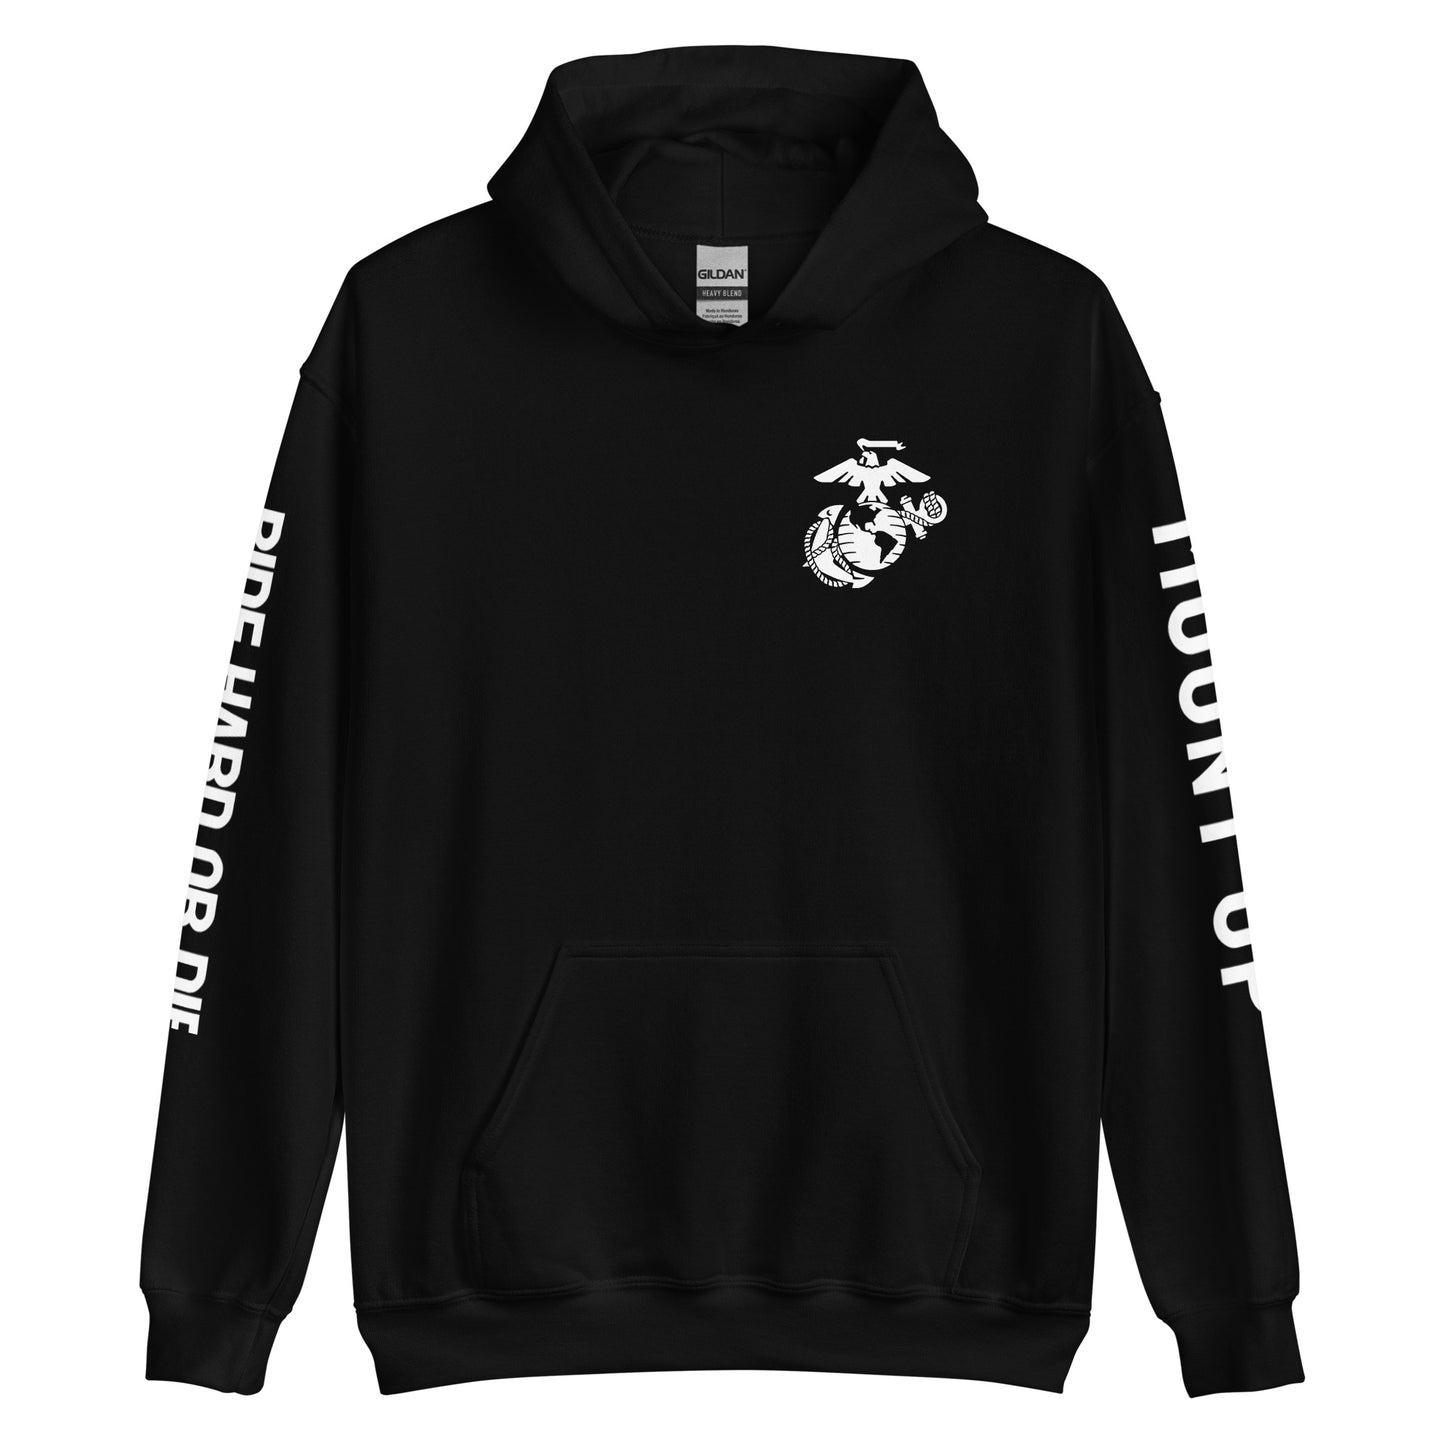 RS Sacramento Hoodie with Sleeve Lettering